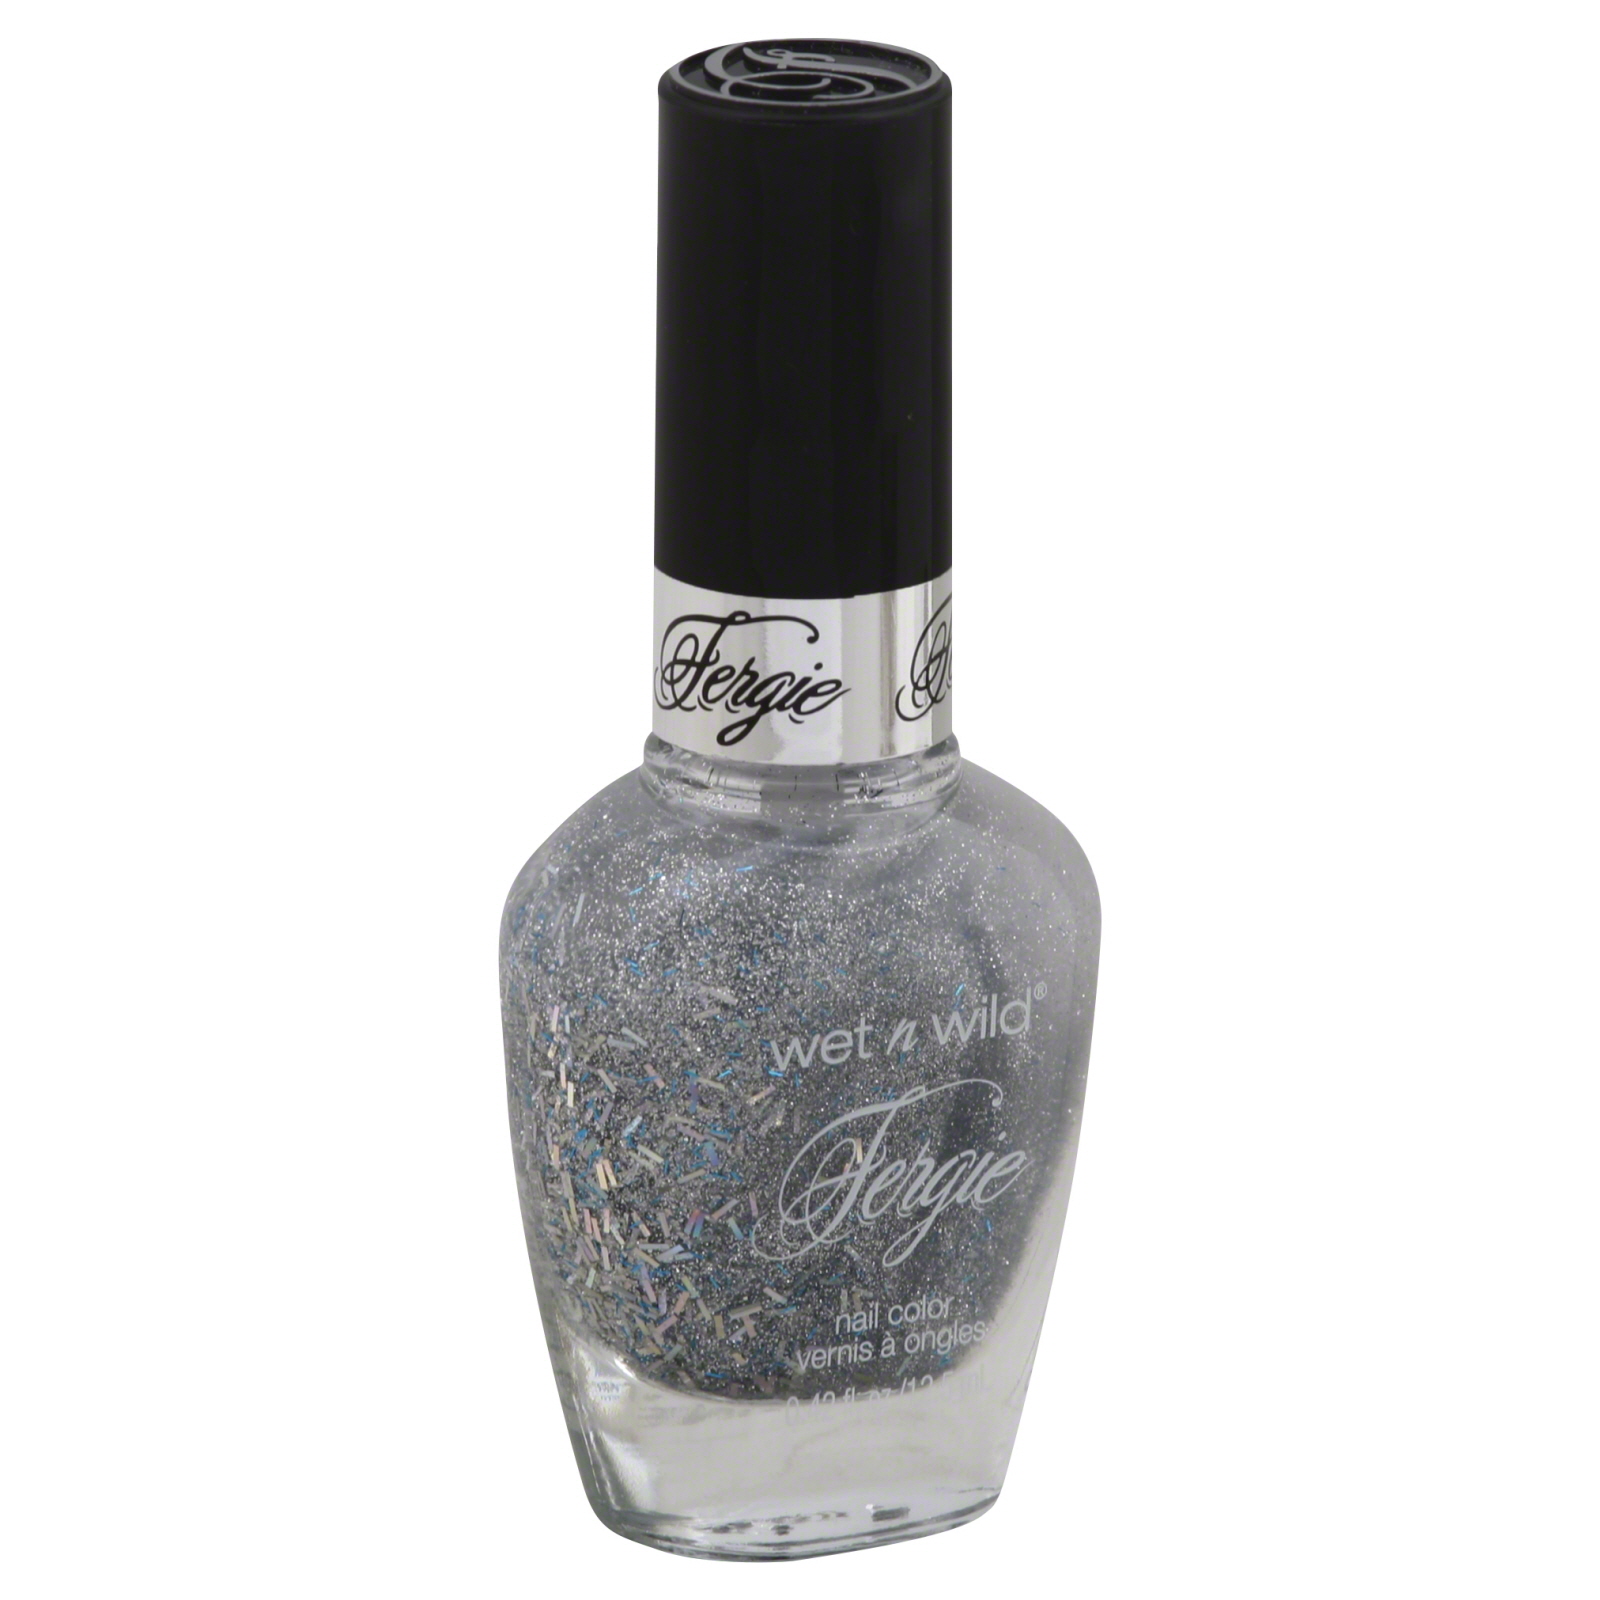 Wet n Wild Fergie Nail Color New Year's Kiss 0.42 fl oz